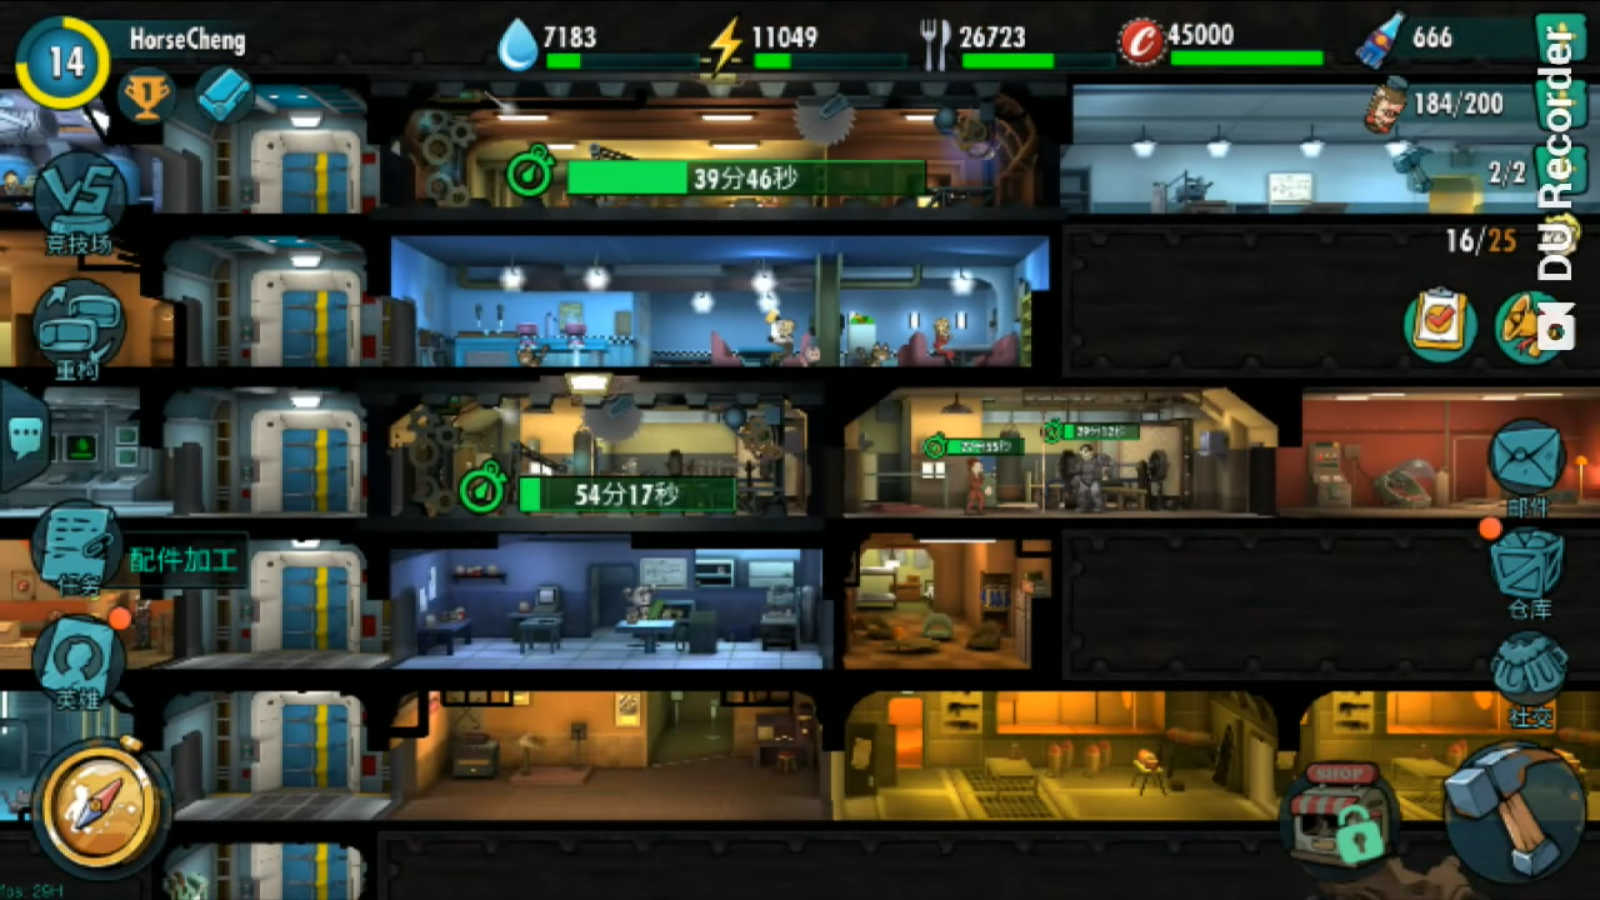 how to cheat at fallout shelter android